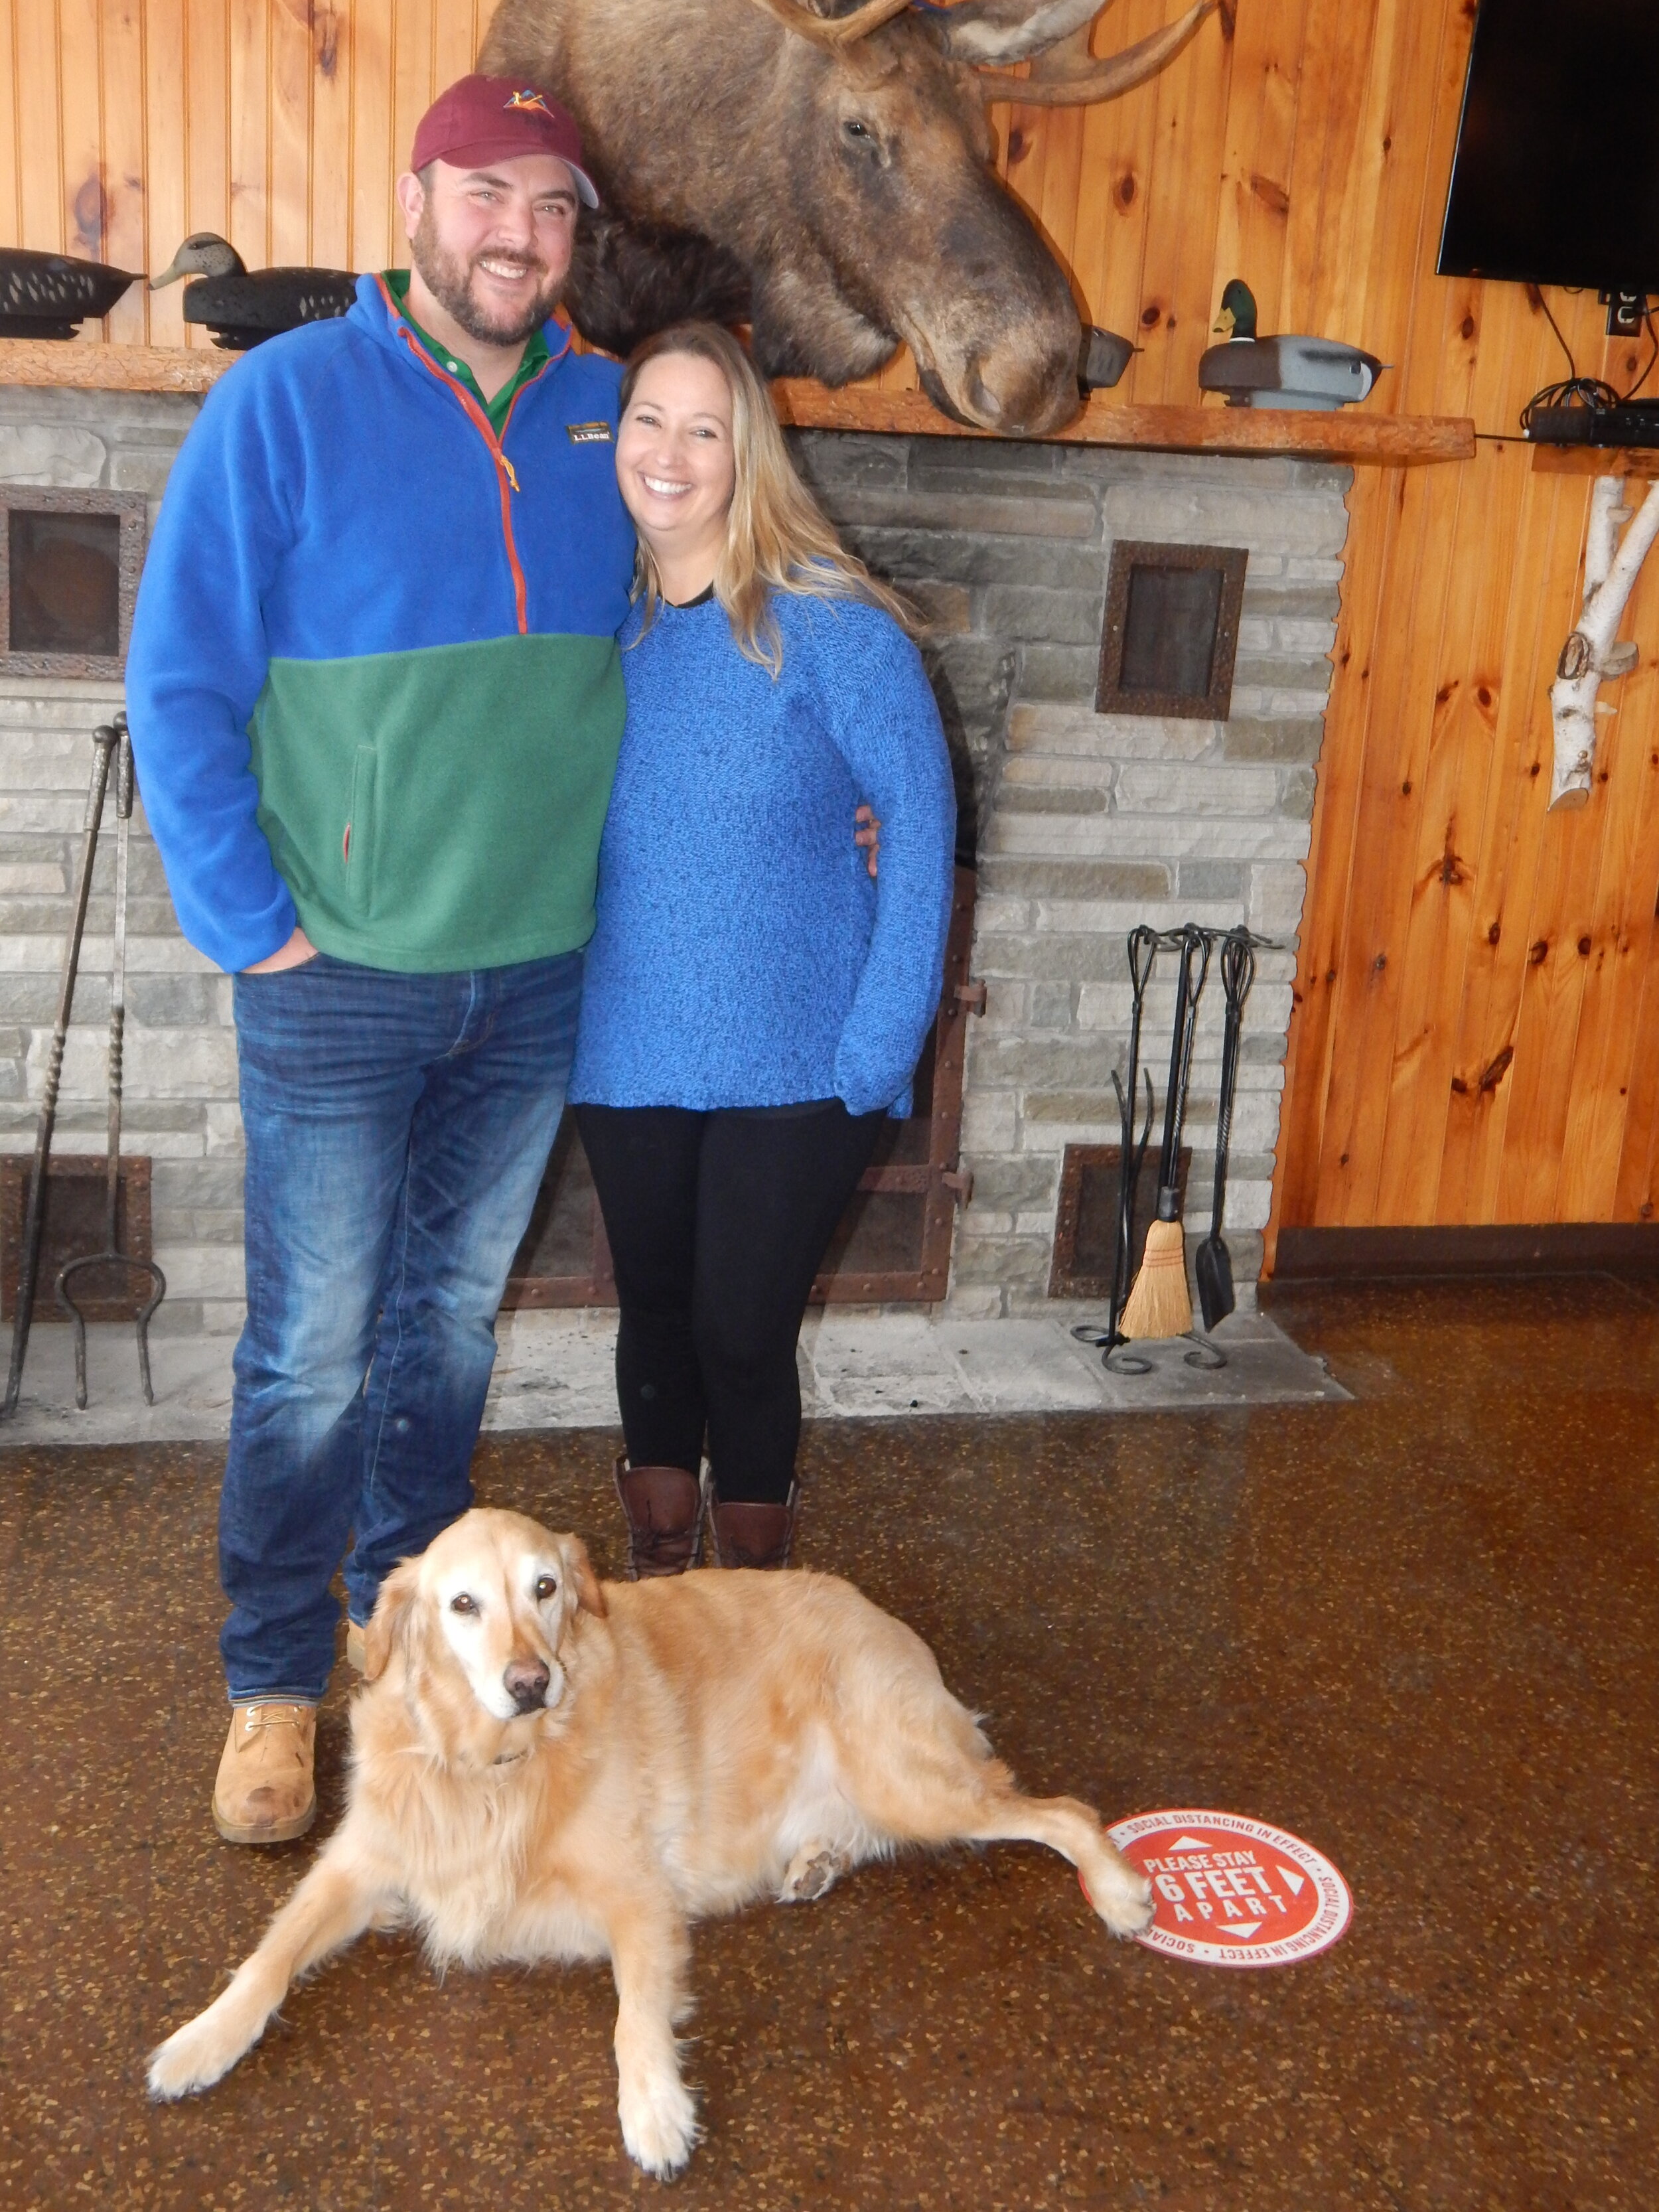    Jaime and Rachel Armstrong, new proprietors at The Lookout restaurant, formerly The Burgundy Steakhouse and the 19th Hole Restaurant, at the Tupper Lake Golf Course, pose with their dog Louie in front of just one of the new editions at the venue -